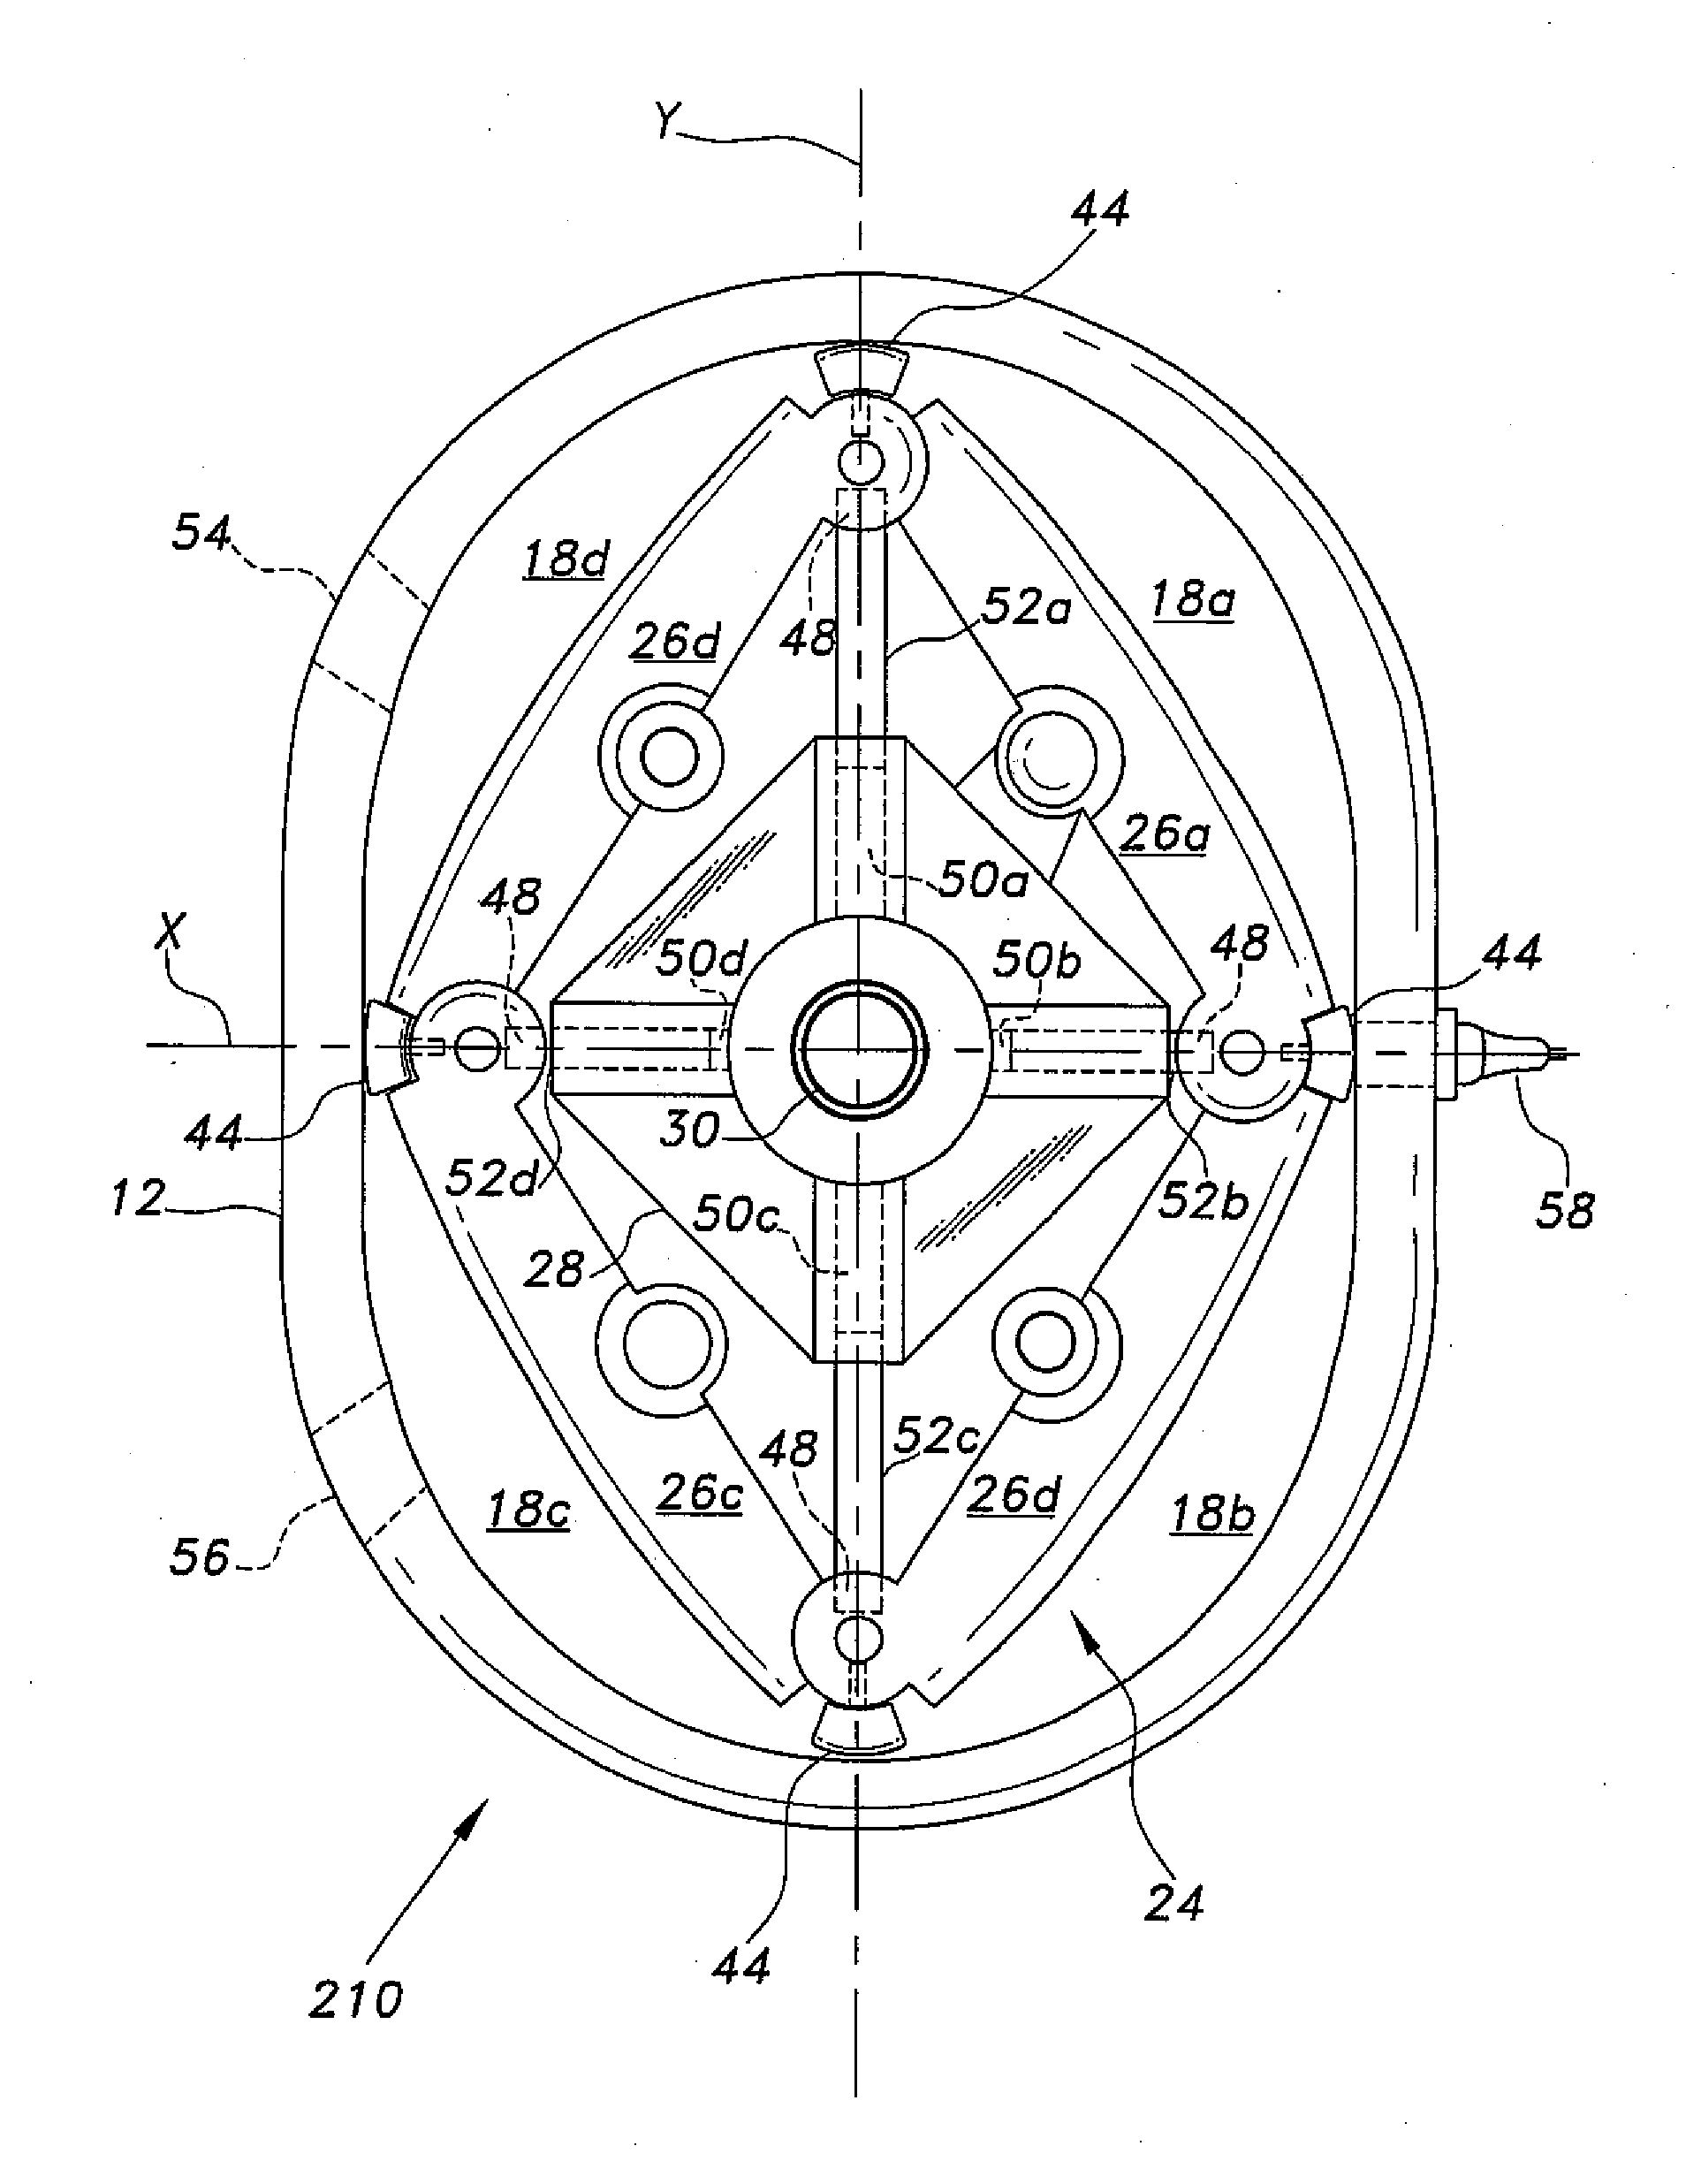 Rotary mechanism with articulating rotor